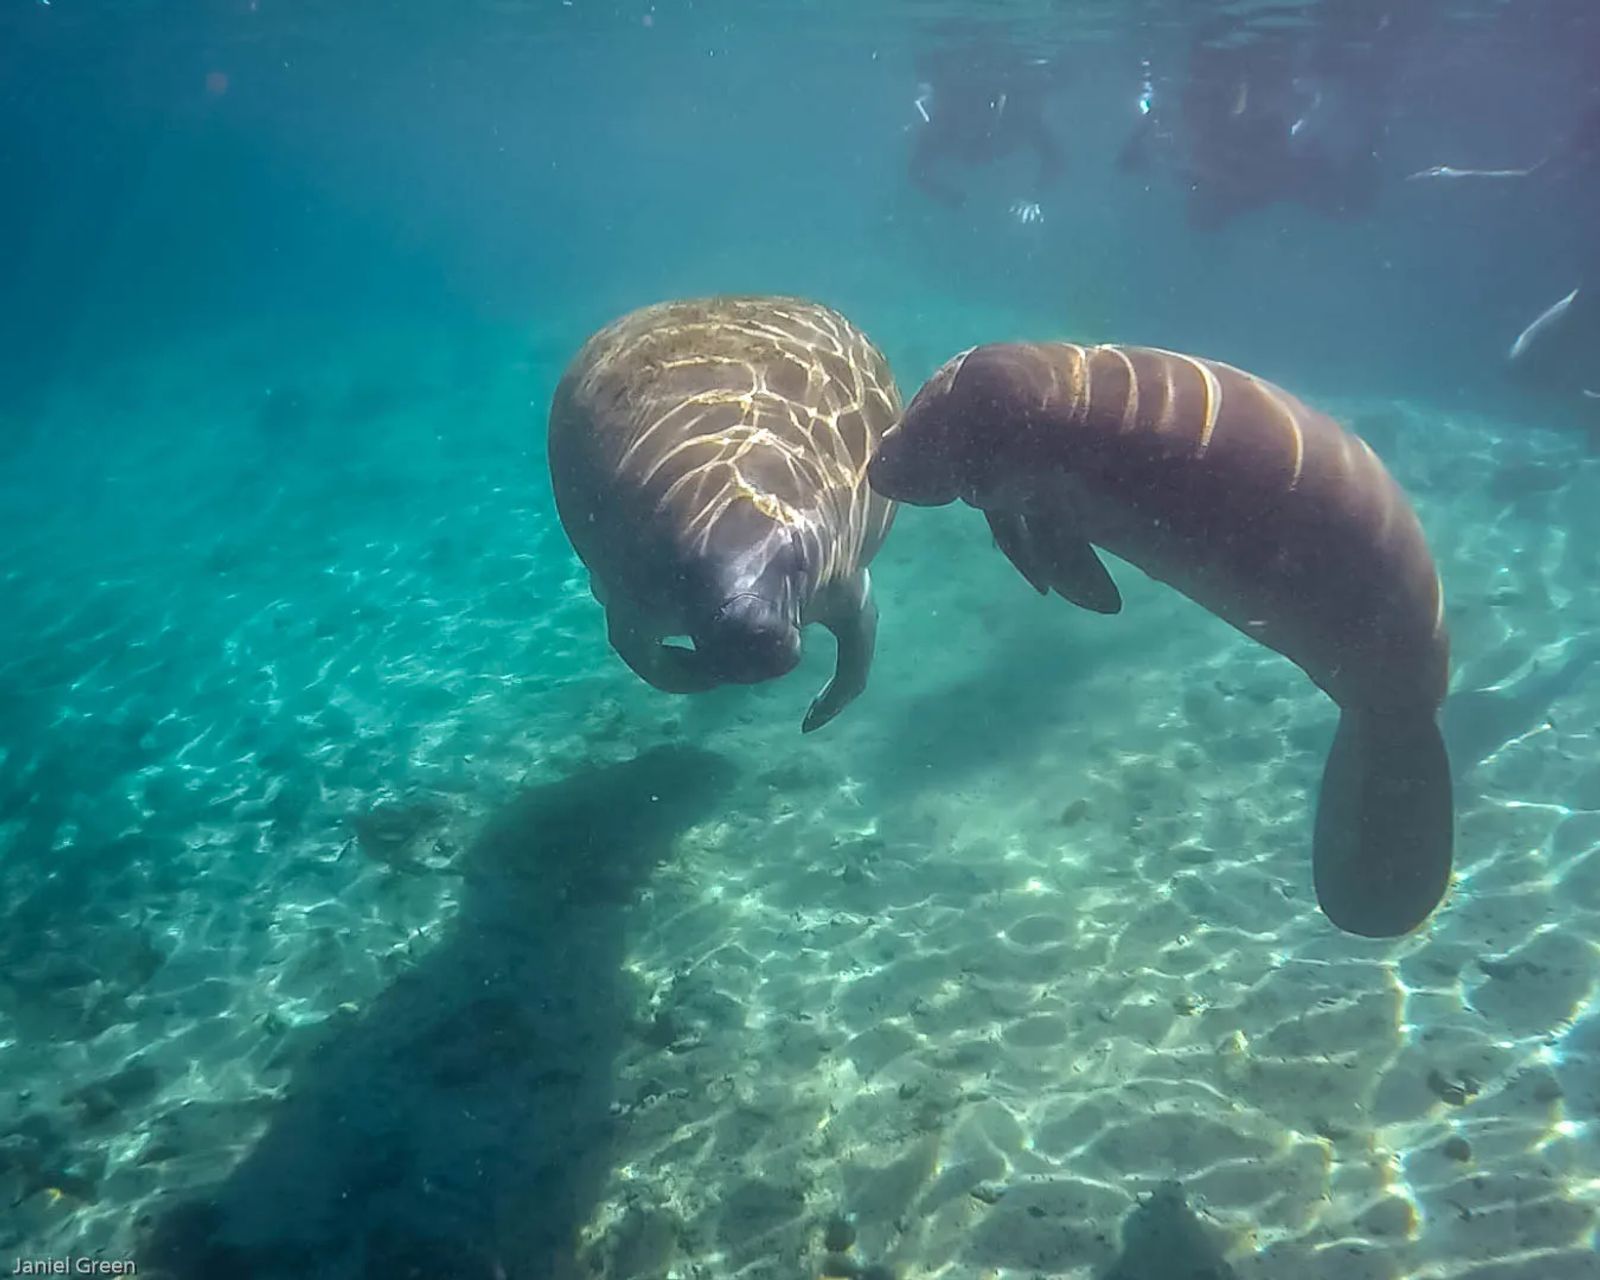 Swim with manatees, a month to month travel guide